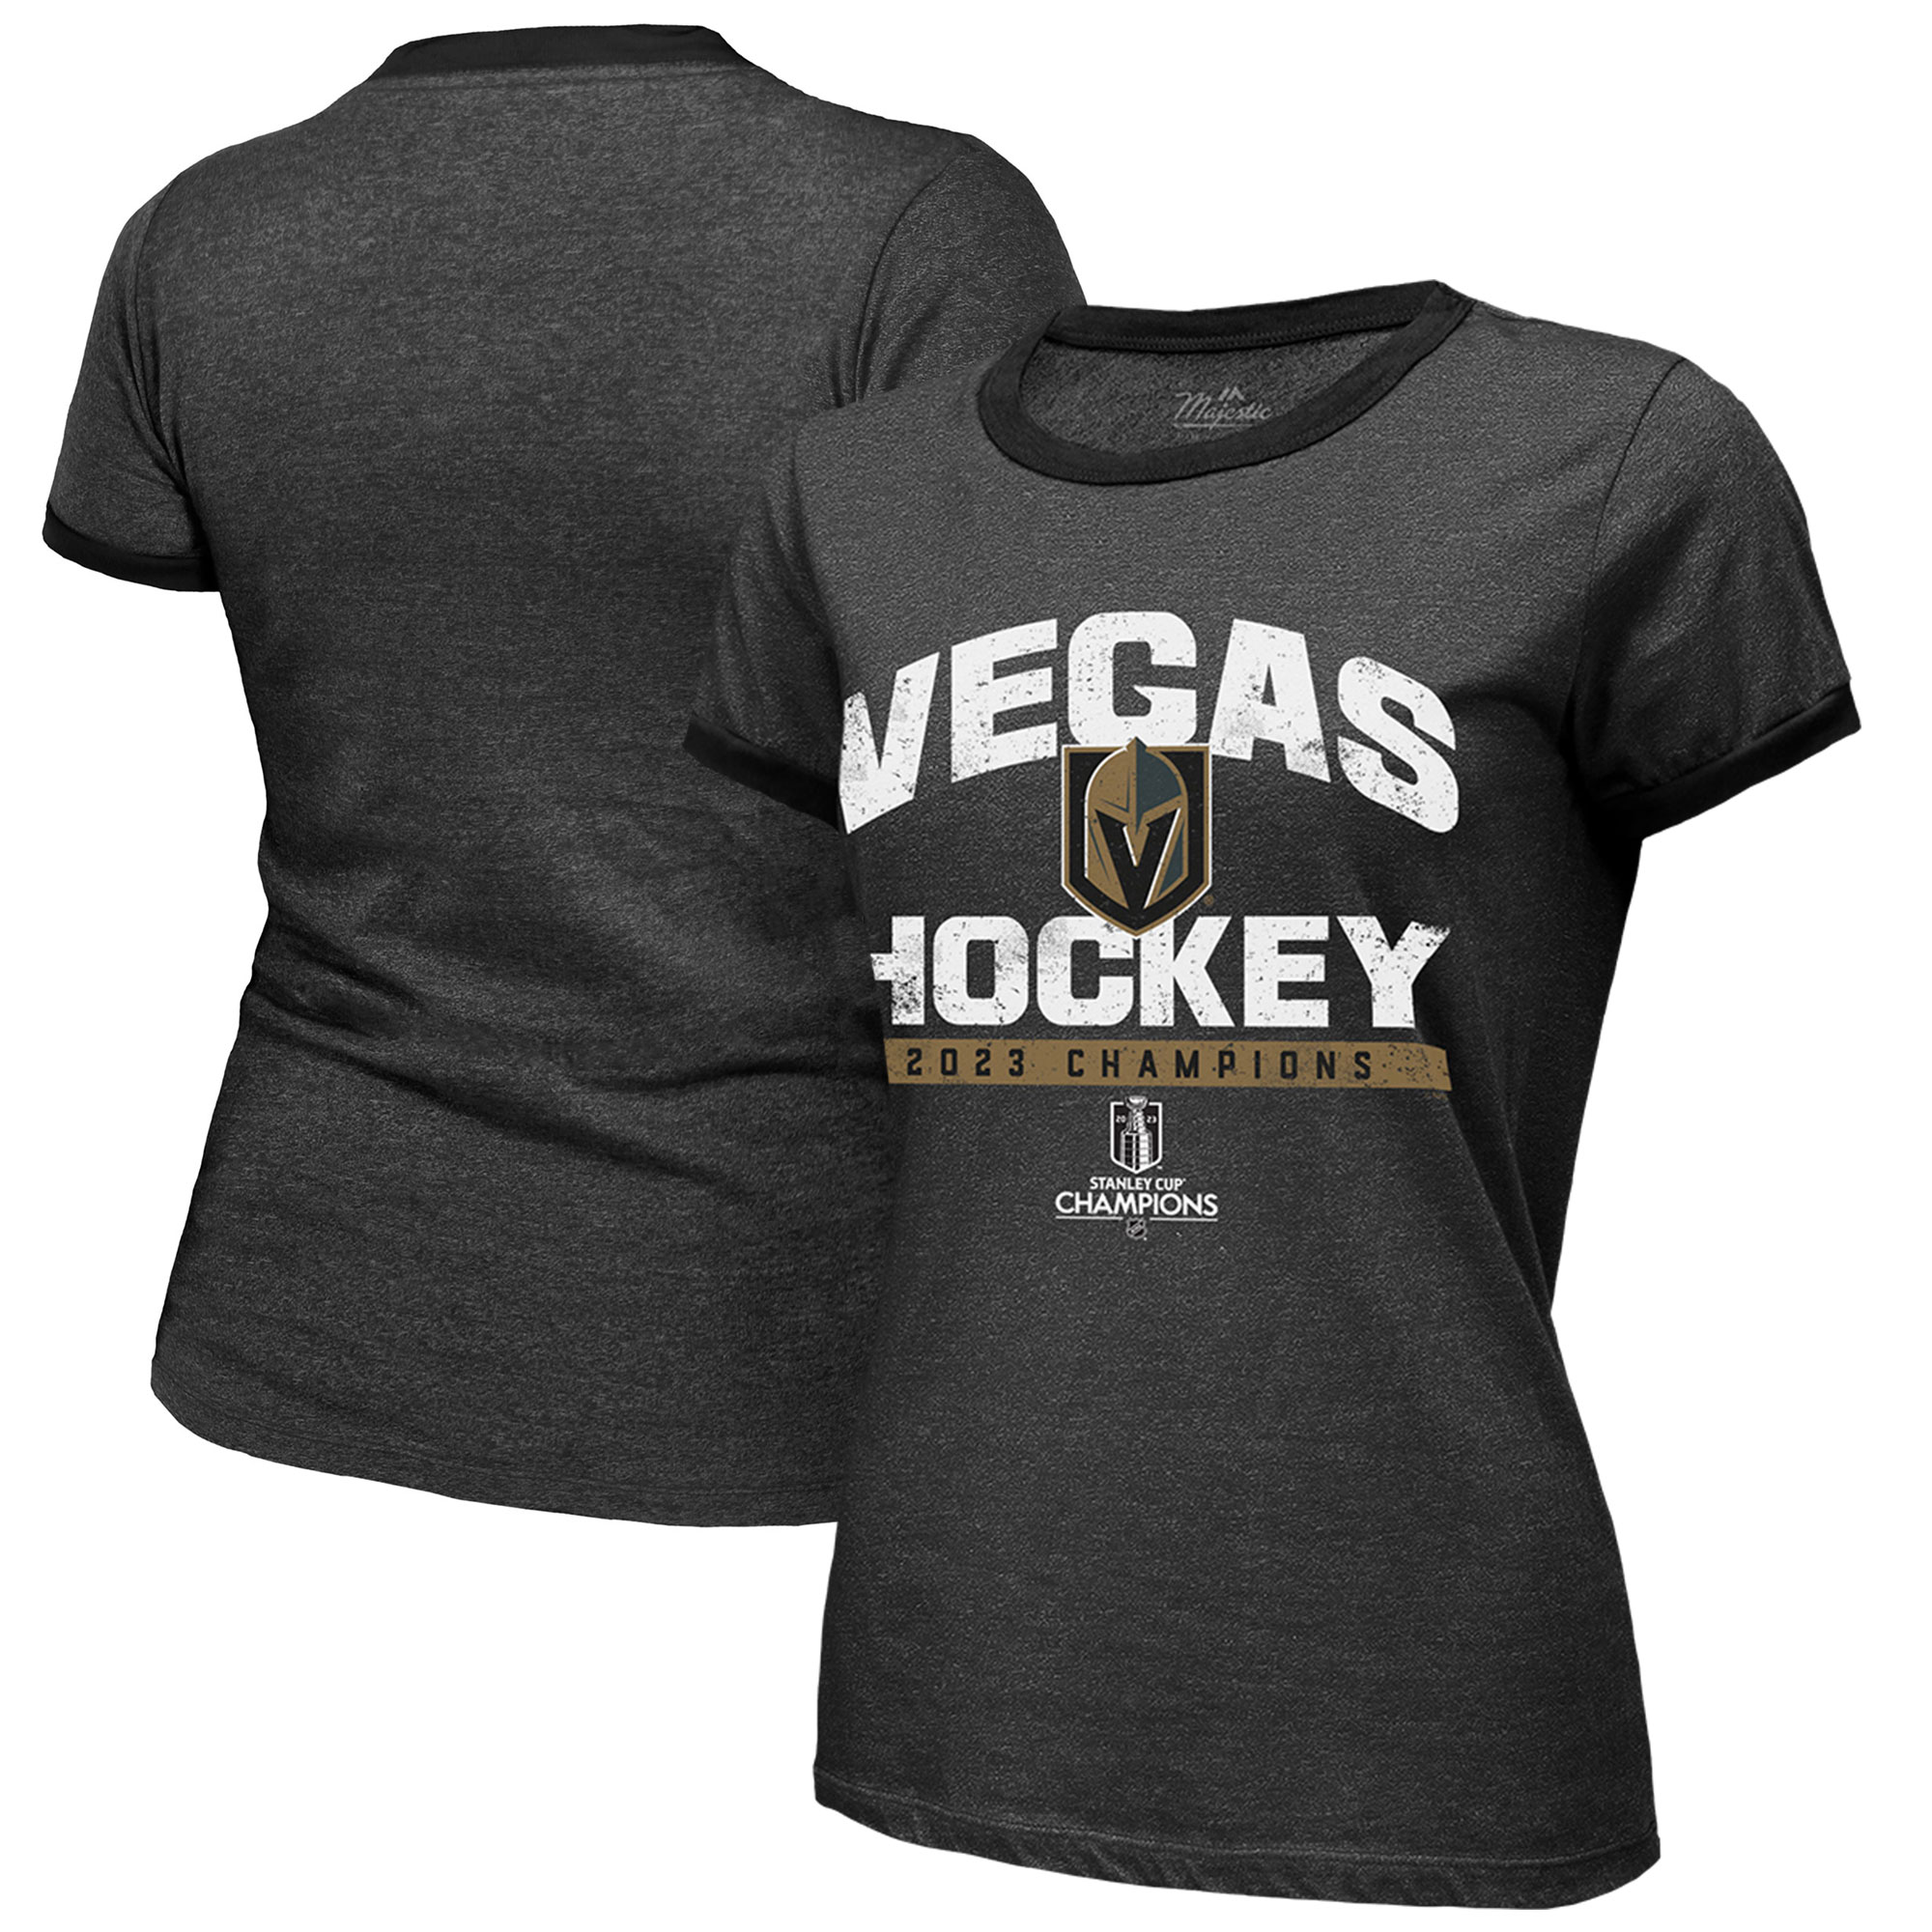 Women's Majestic Threads  Black Vegas Golden Knights 2023 Stanley Cup Champions Ringer Tri-Blend T-Shirt - image 1 of 3